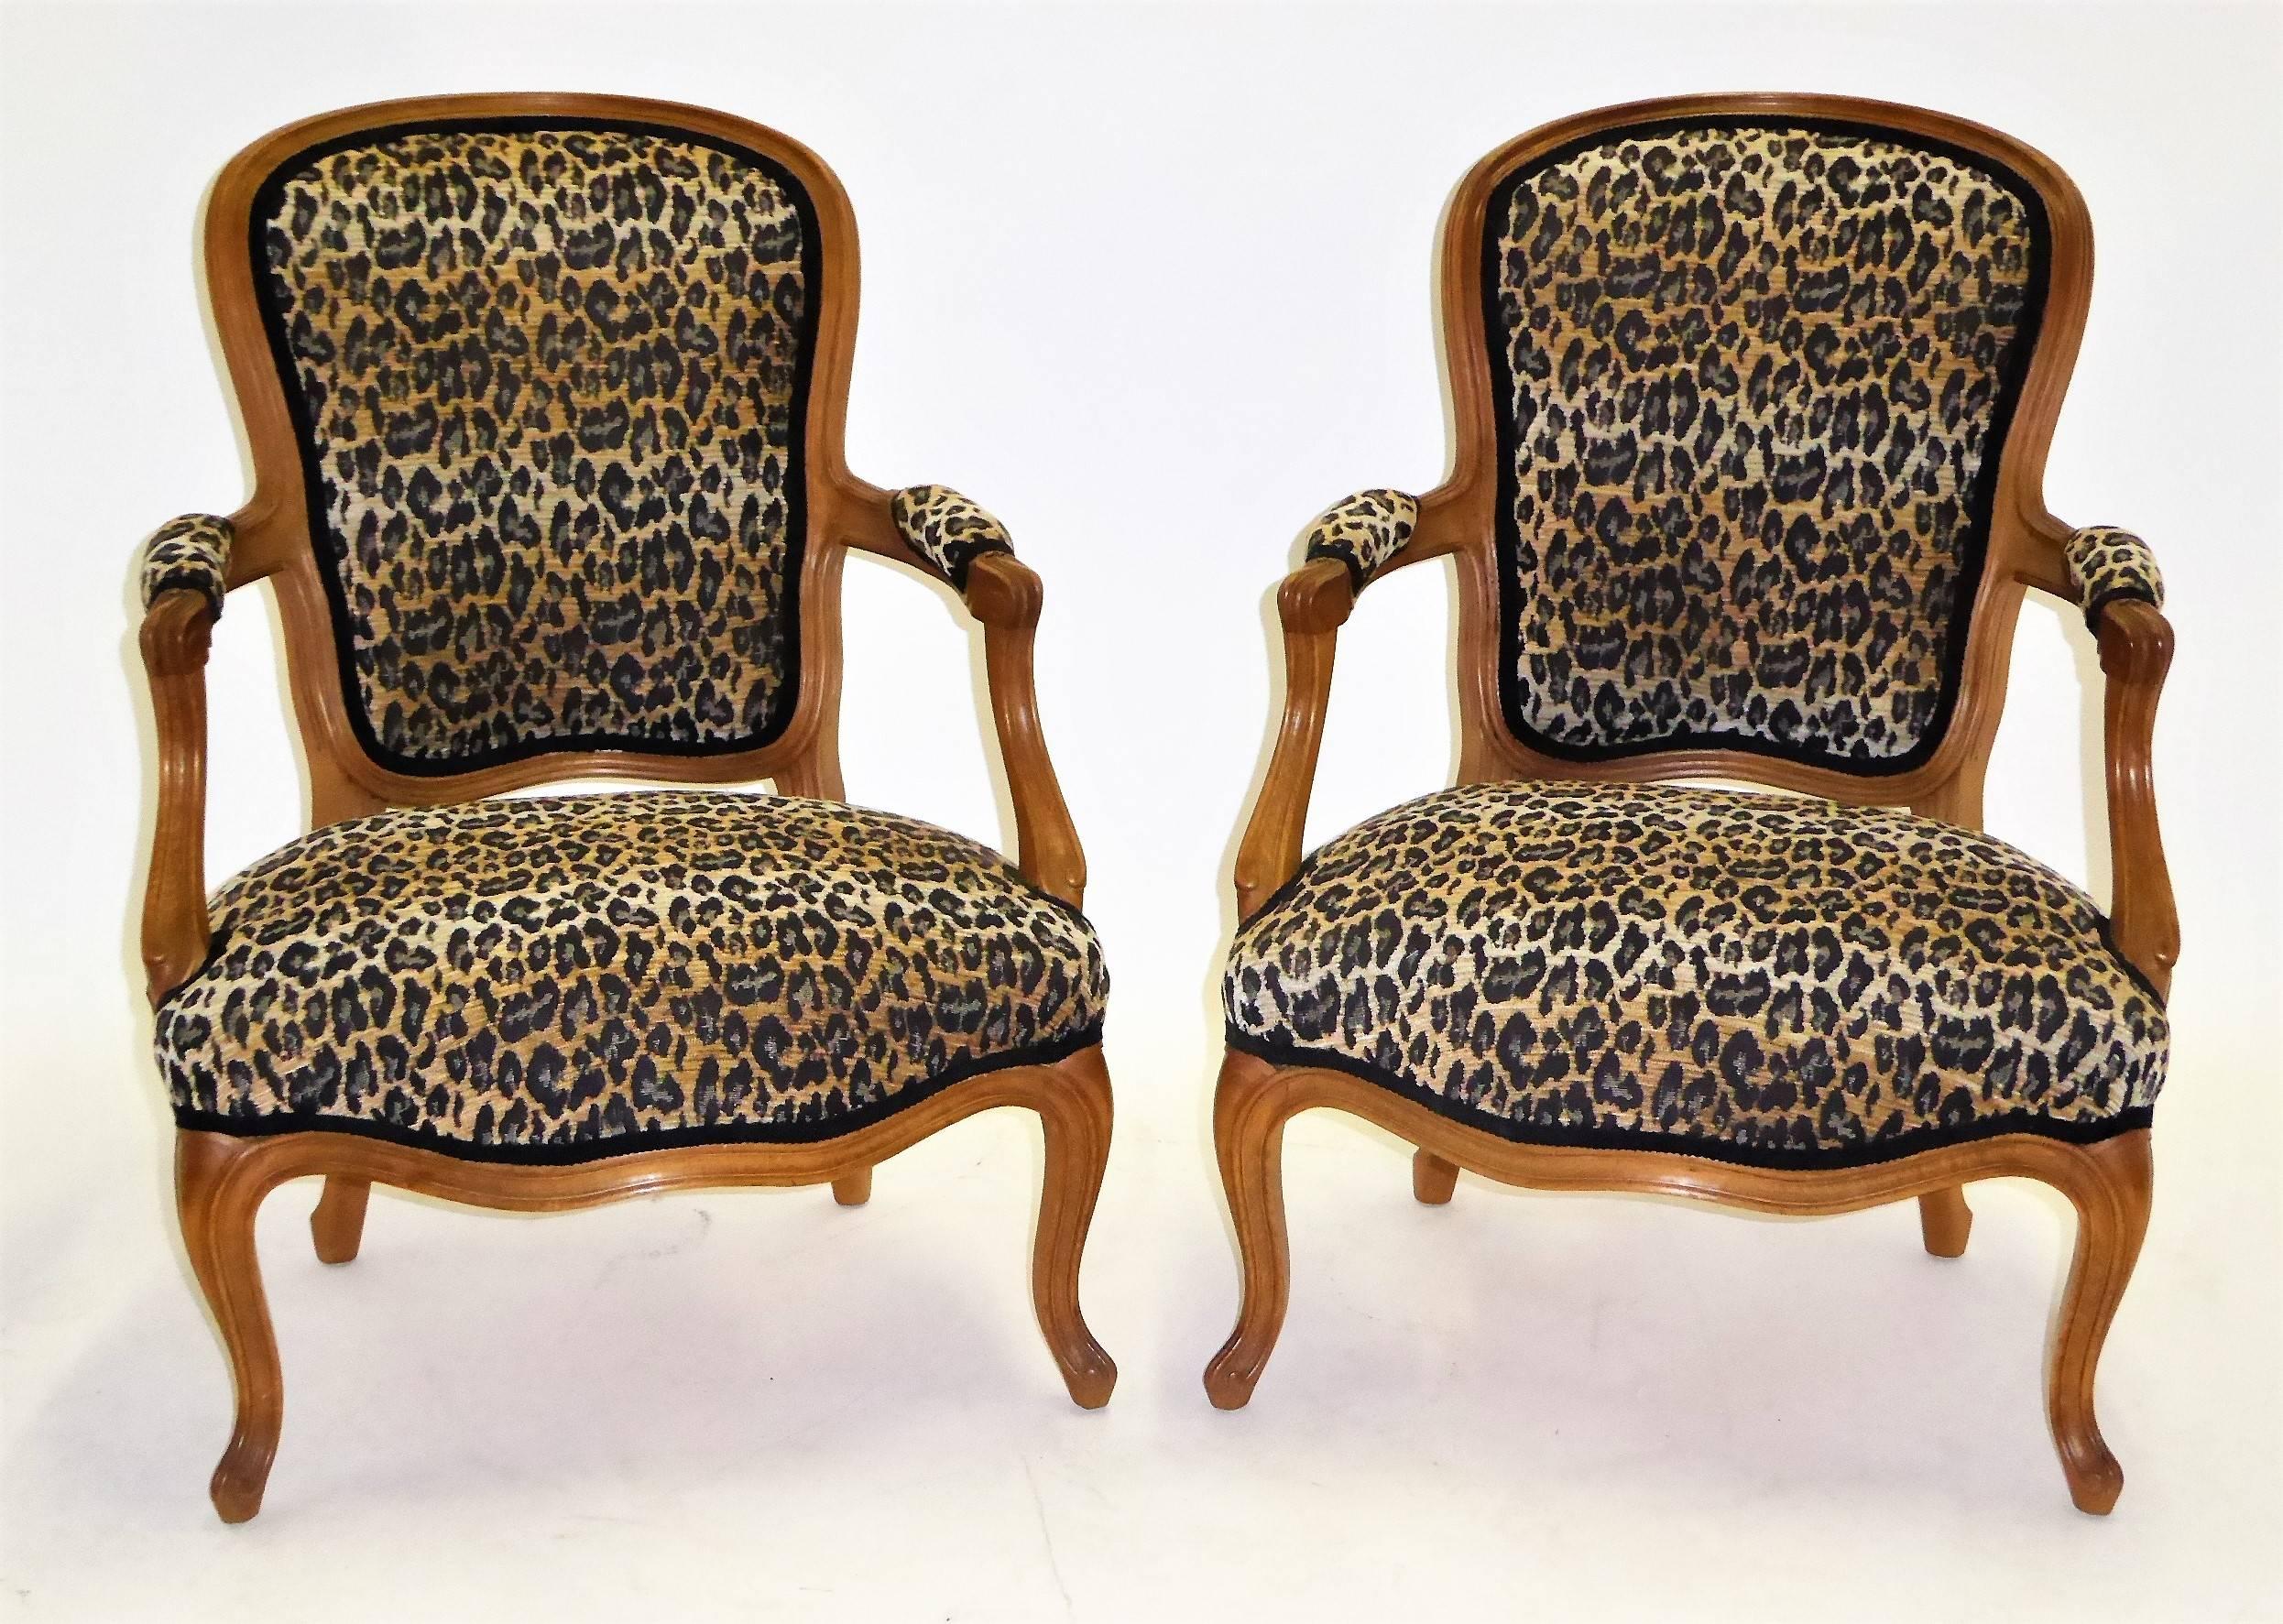 REDUCED FROM $3.850....Lovely pair of Louis XV style fauteuils beautifully carved and newly upholstered in a chenille woven leopard motif in a chauffeuse height. Made in Athens by Saridis, the famed furniture makers for which TH Robsjohn-Gibbings